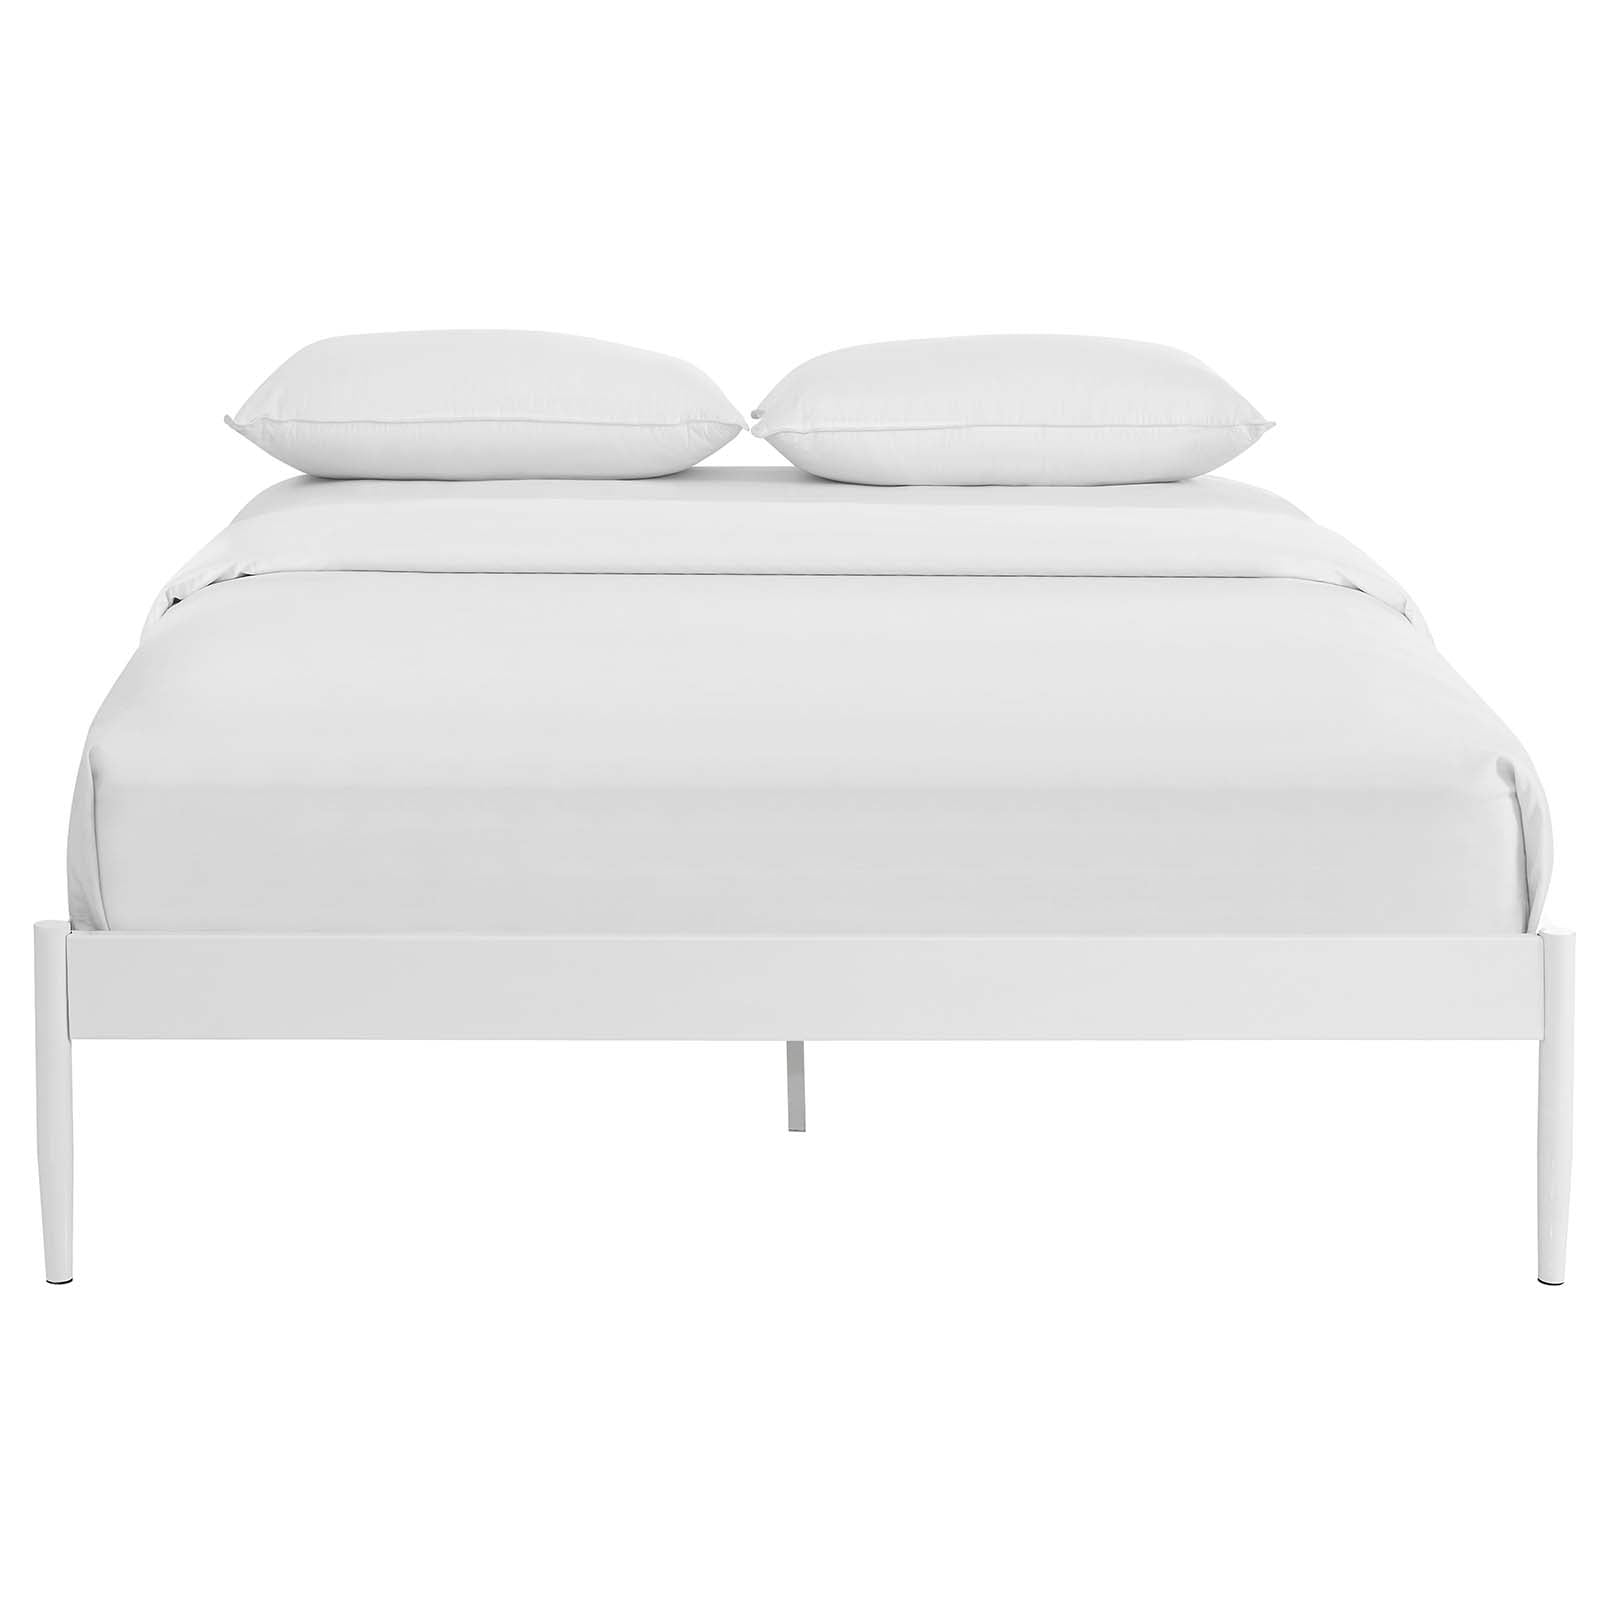 Modway Beds - Elsie Queen Bed Frame White